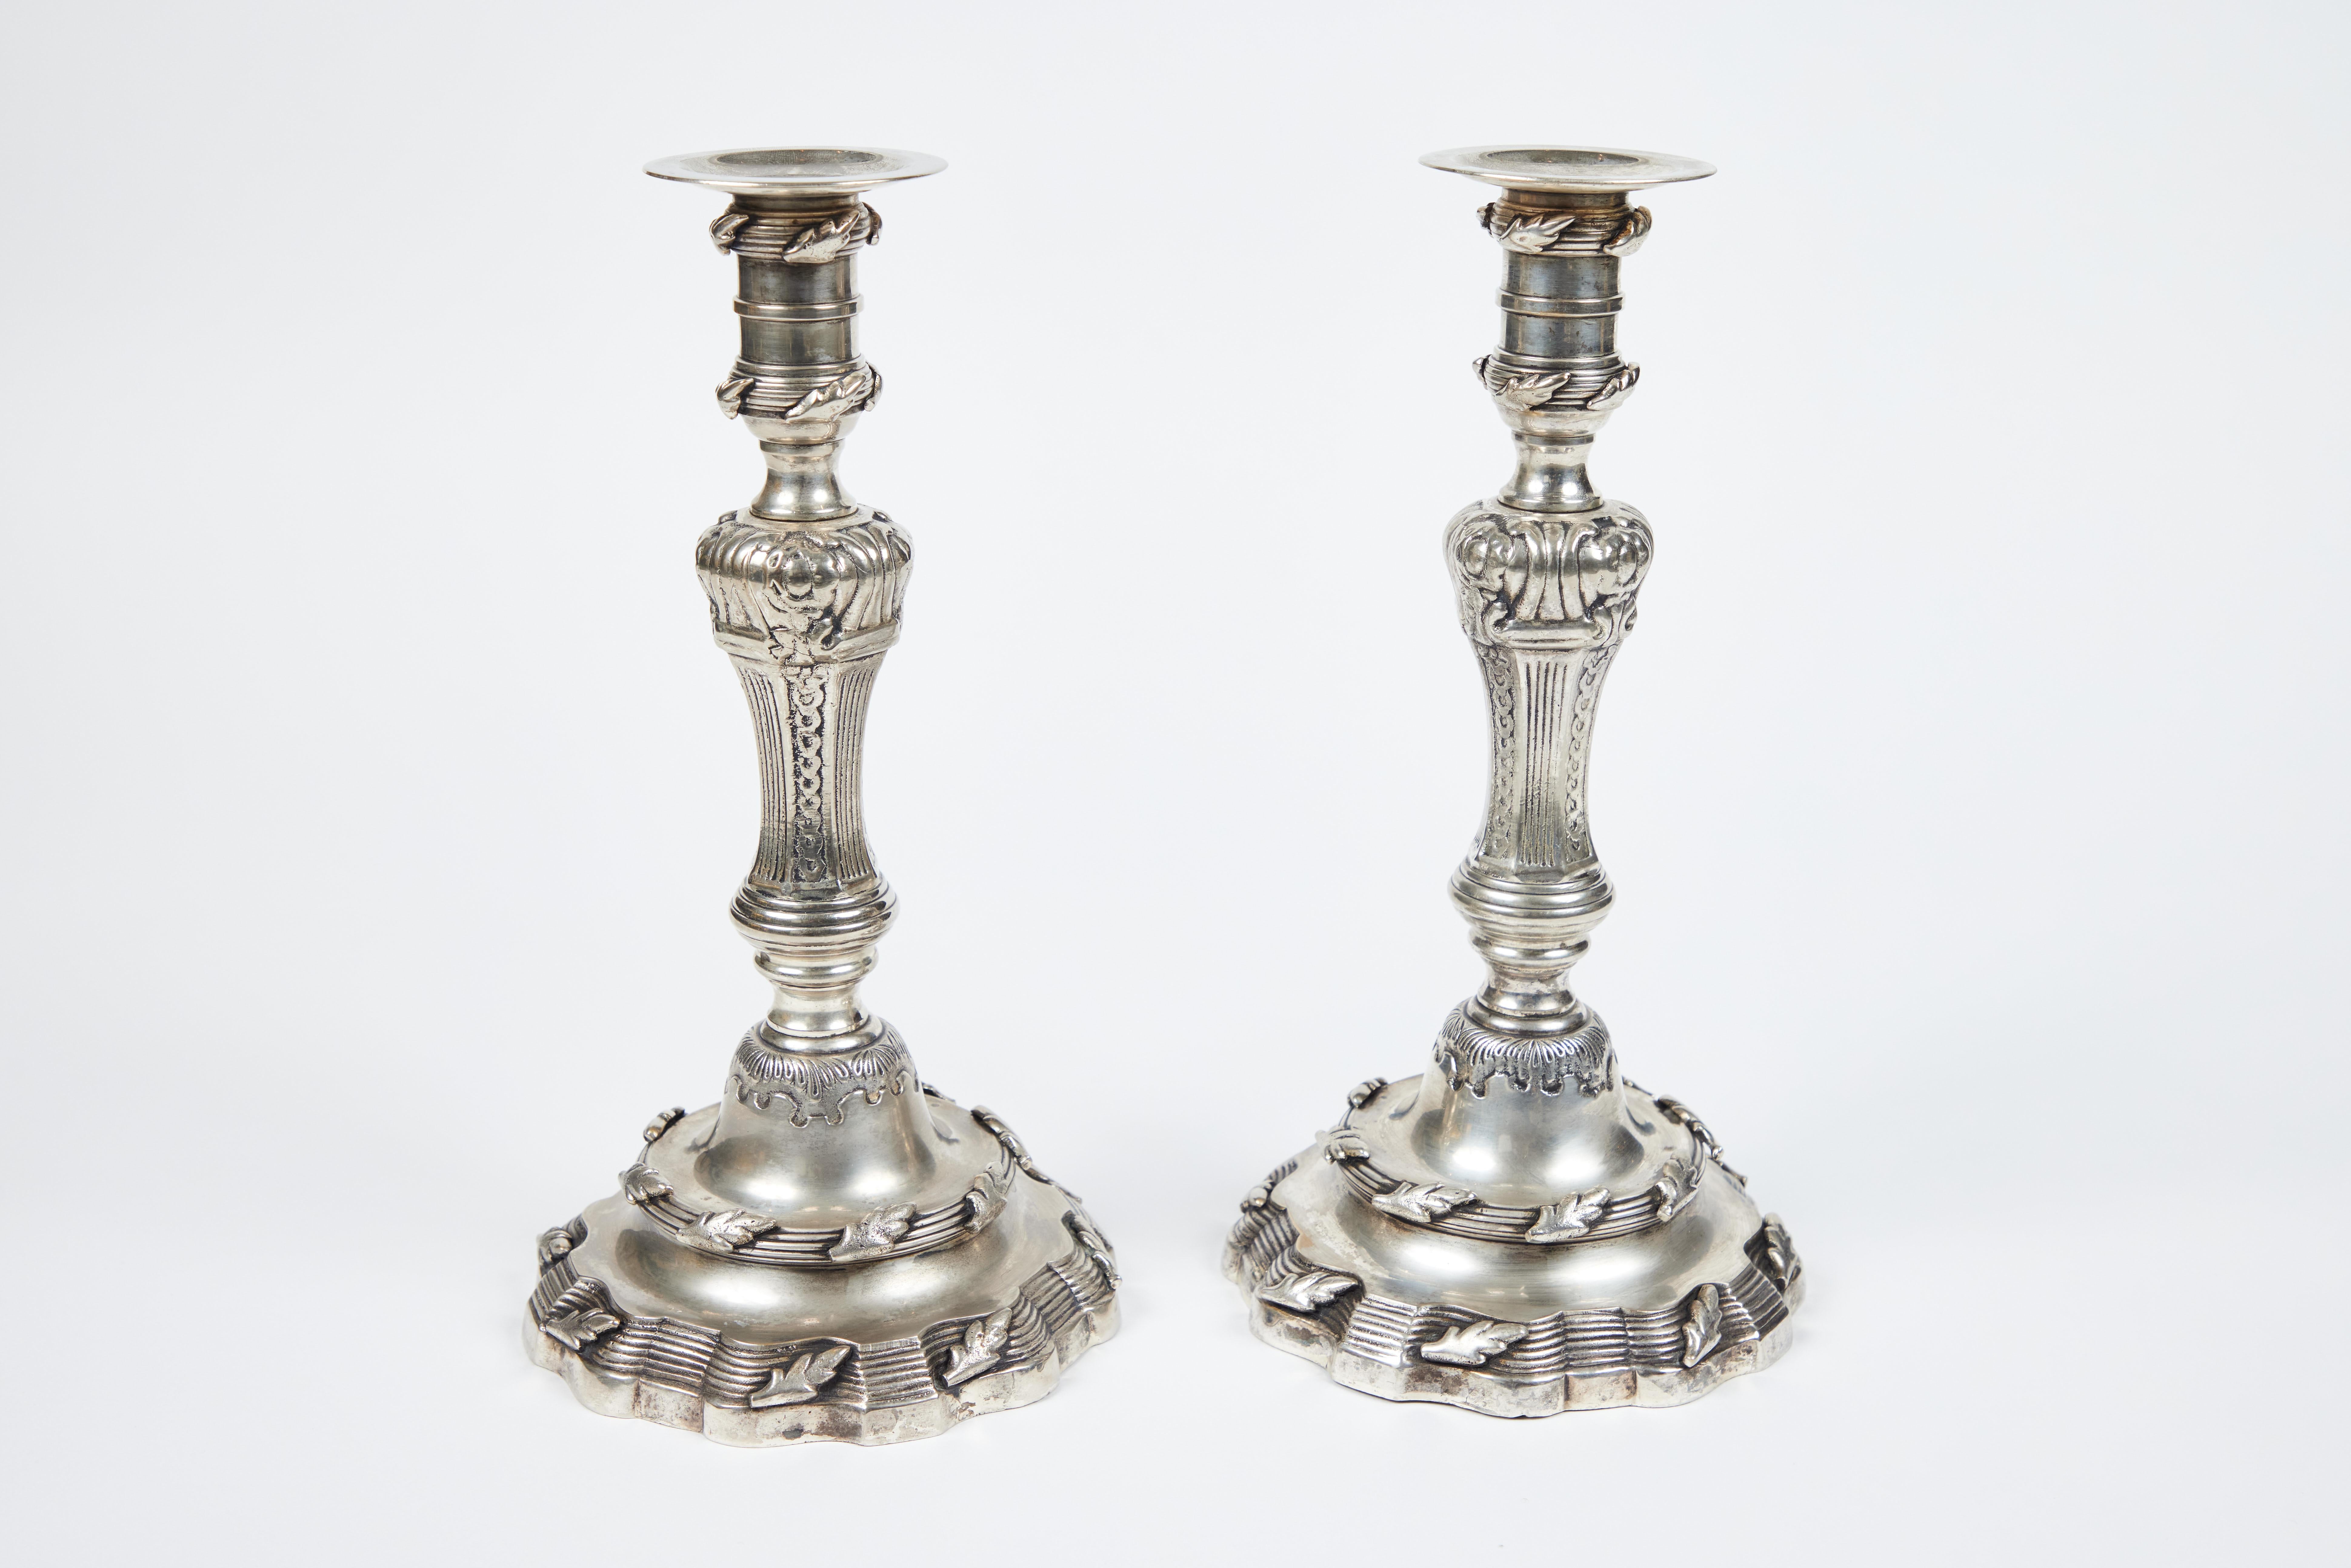 Our pair of oversized vintage heavy silverplate candle sticks are quite elegant. Ornately decorated from the top to the base with lots of leaf and pattern detailing, they are truly a dramatic statement. They would be an impressive addition to any